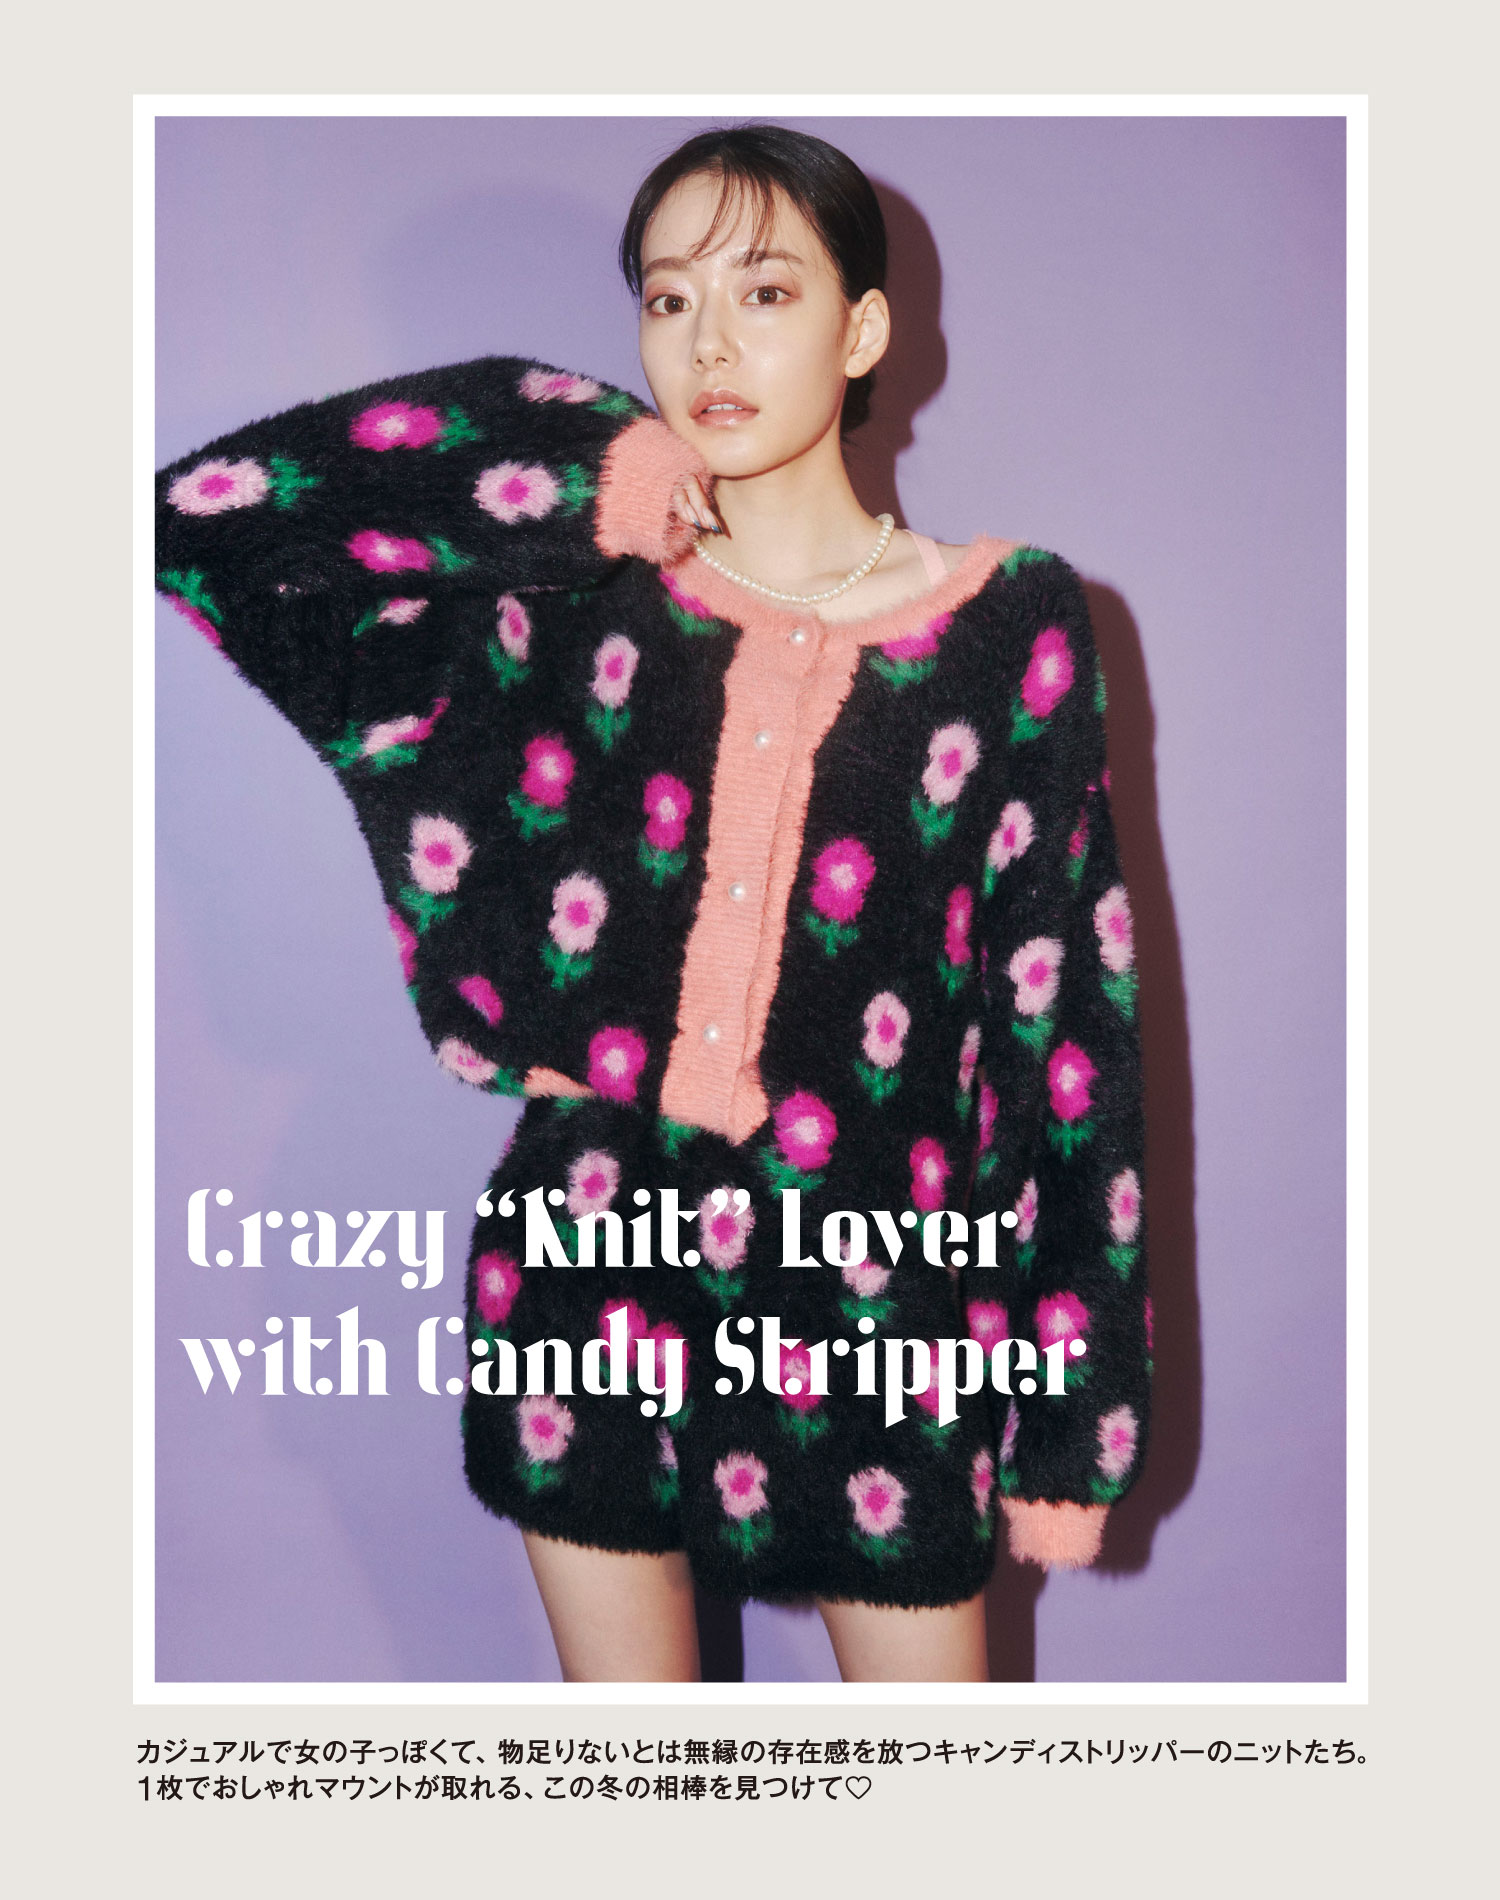 Crazy Knit Lover with Candy Stripper